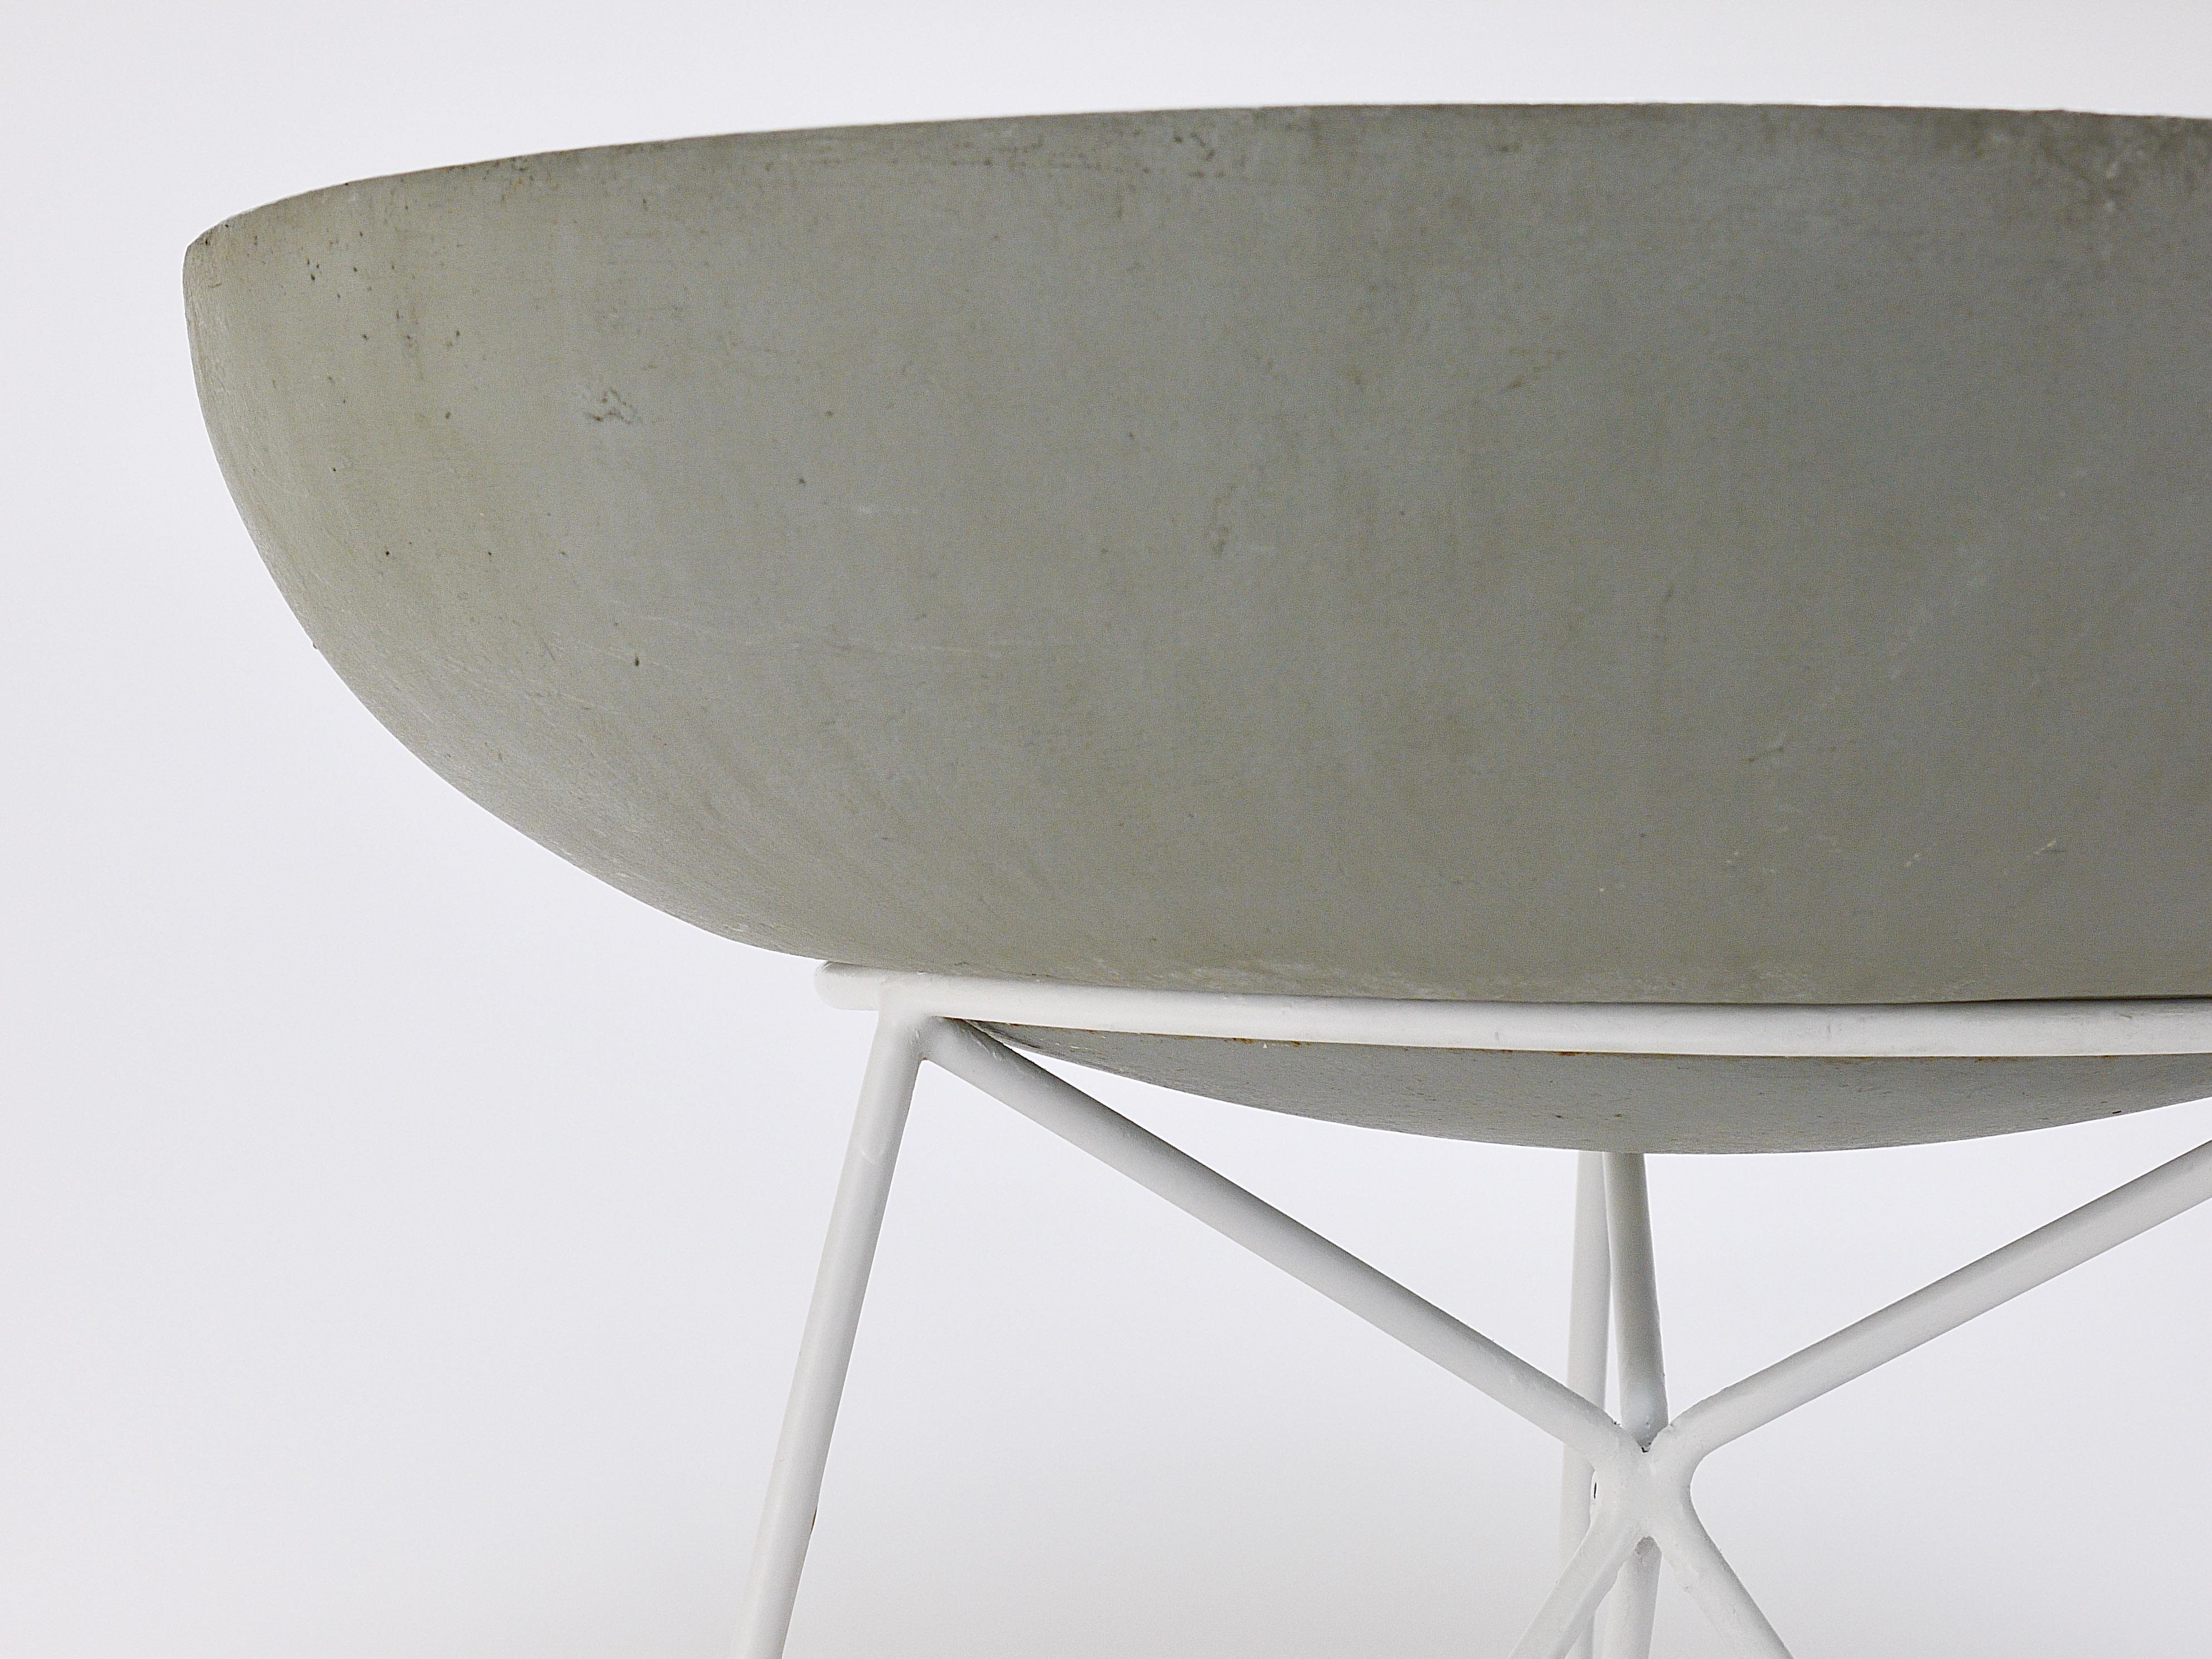 Large Eternit Concrete Bowl Planter, Tripod Loop Base, Switzerland, 1950s In Good Condition For Sale In Vienna, AT